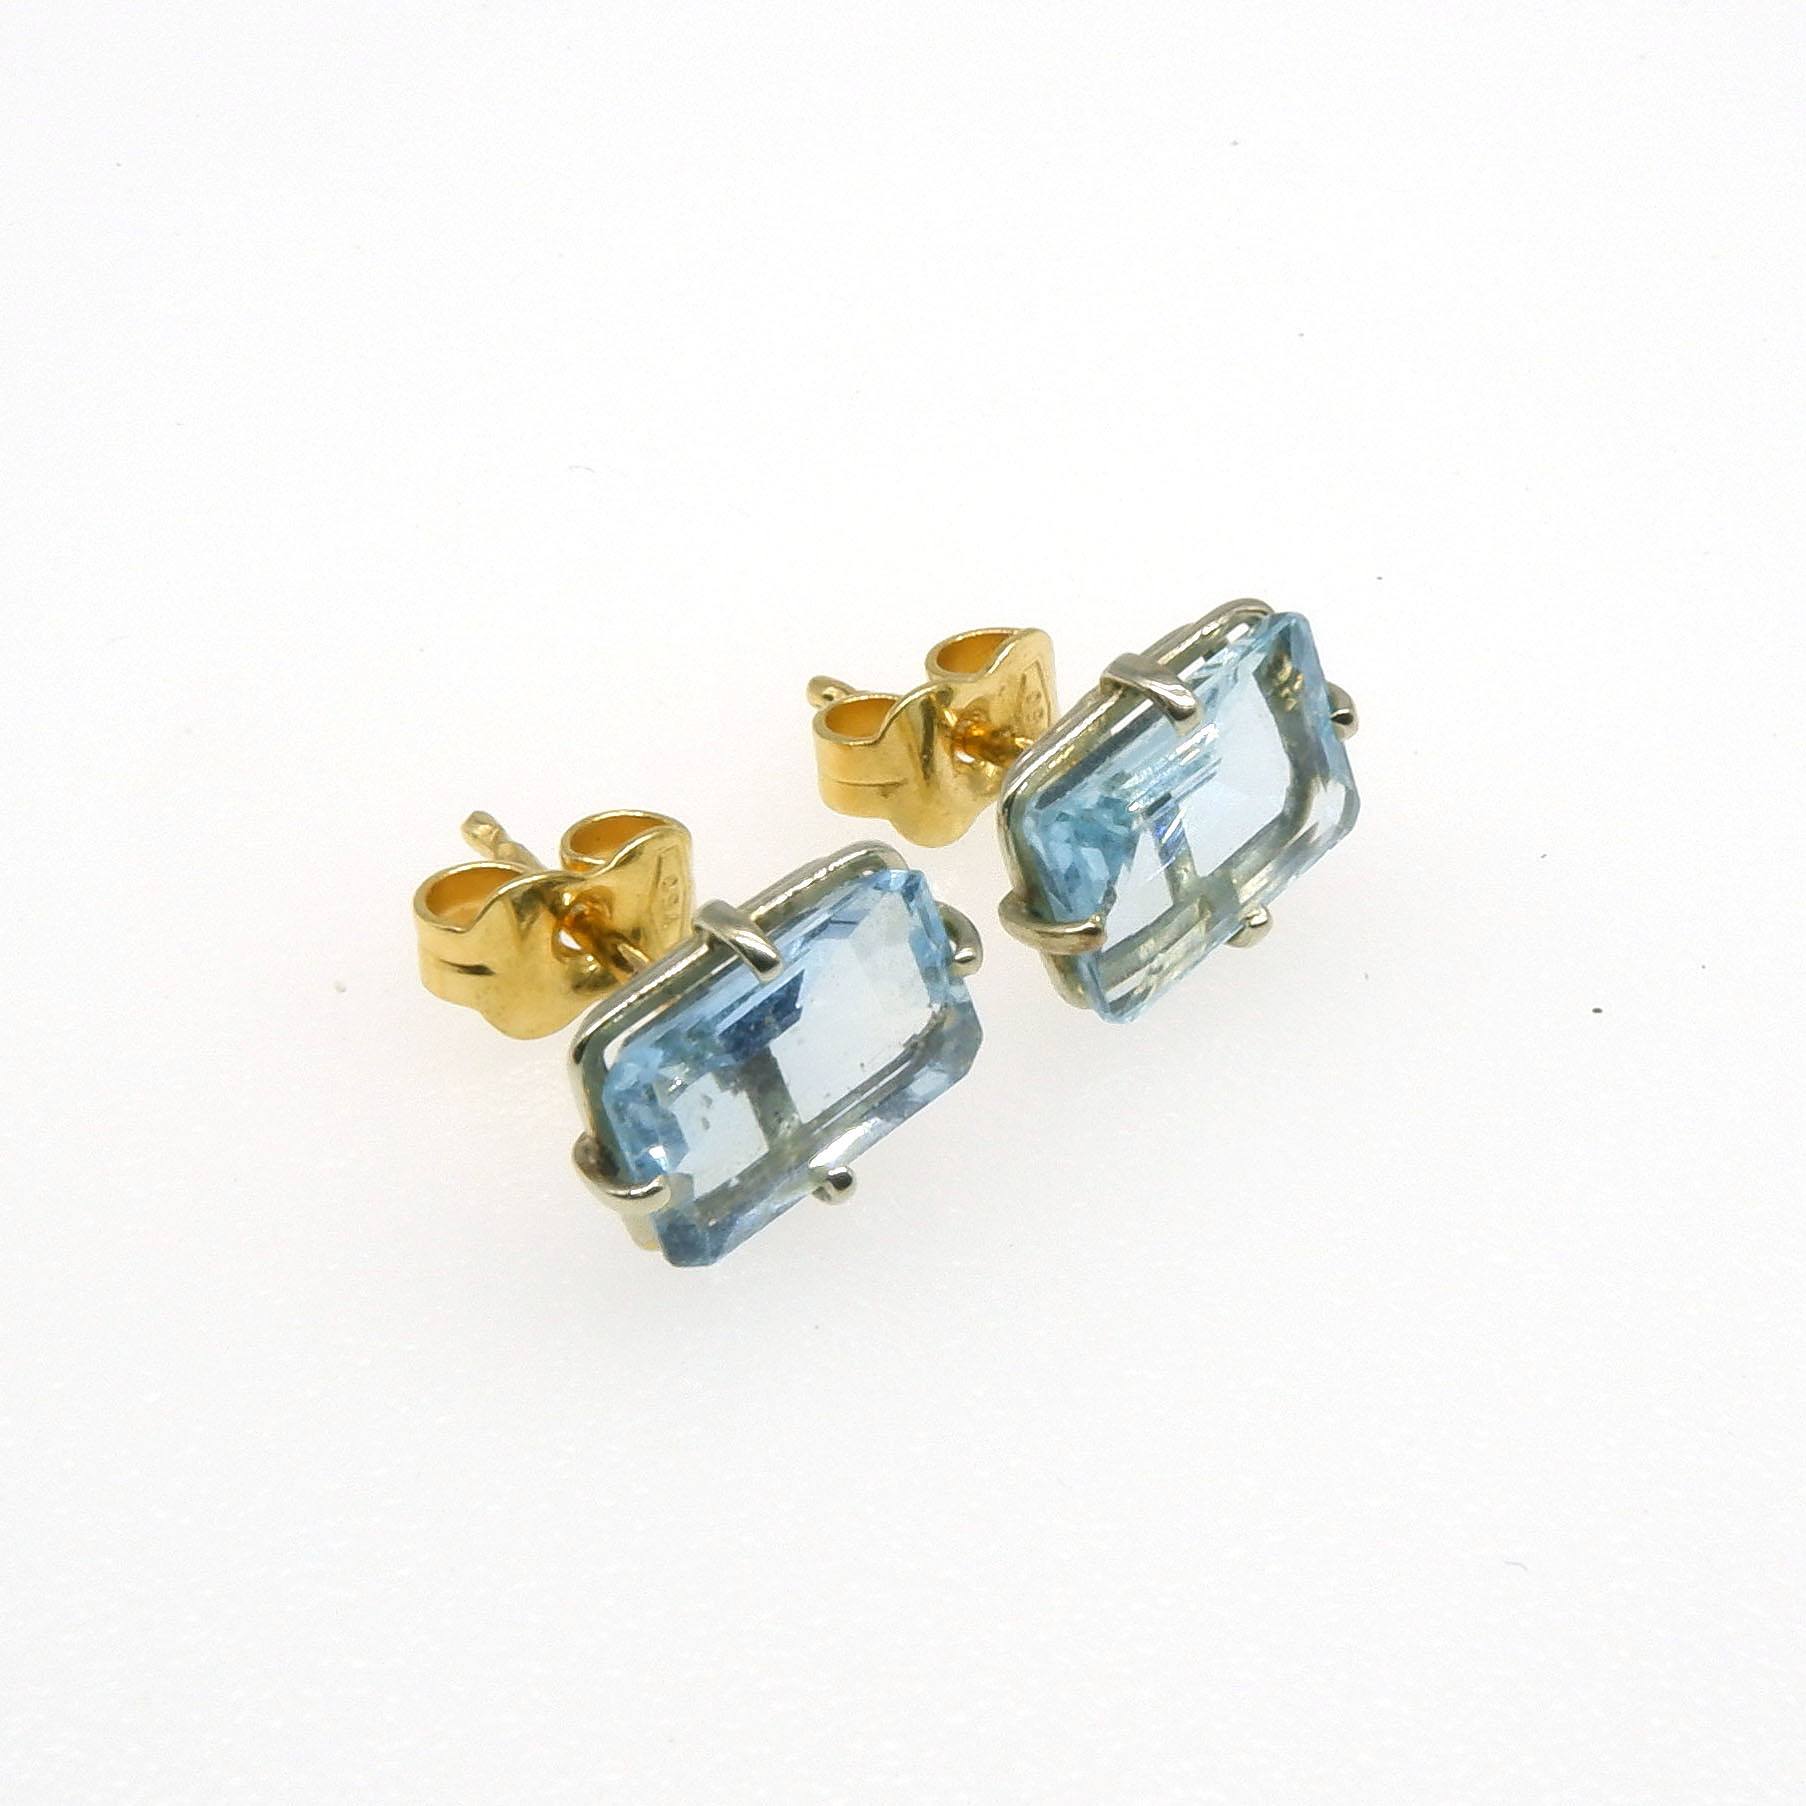 '18ct White and Yellow Gold Earrings with Emerald Cut Medium Aquamarine'